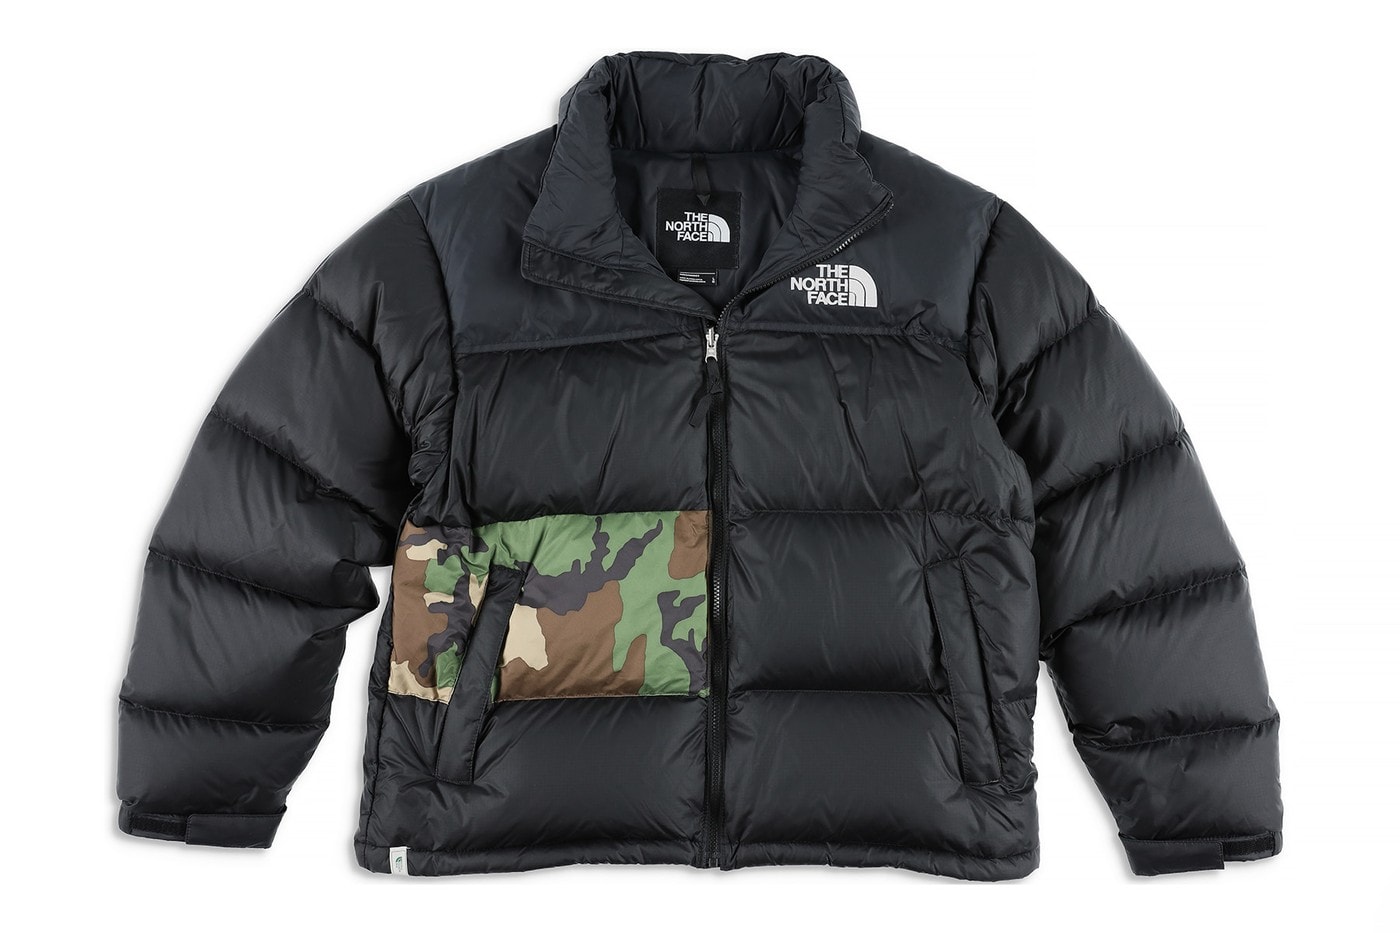 The North Face 舊品再製系列「Remade Collection」釋出多款羽絨外套